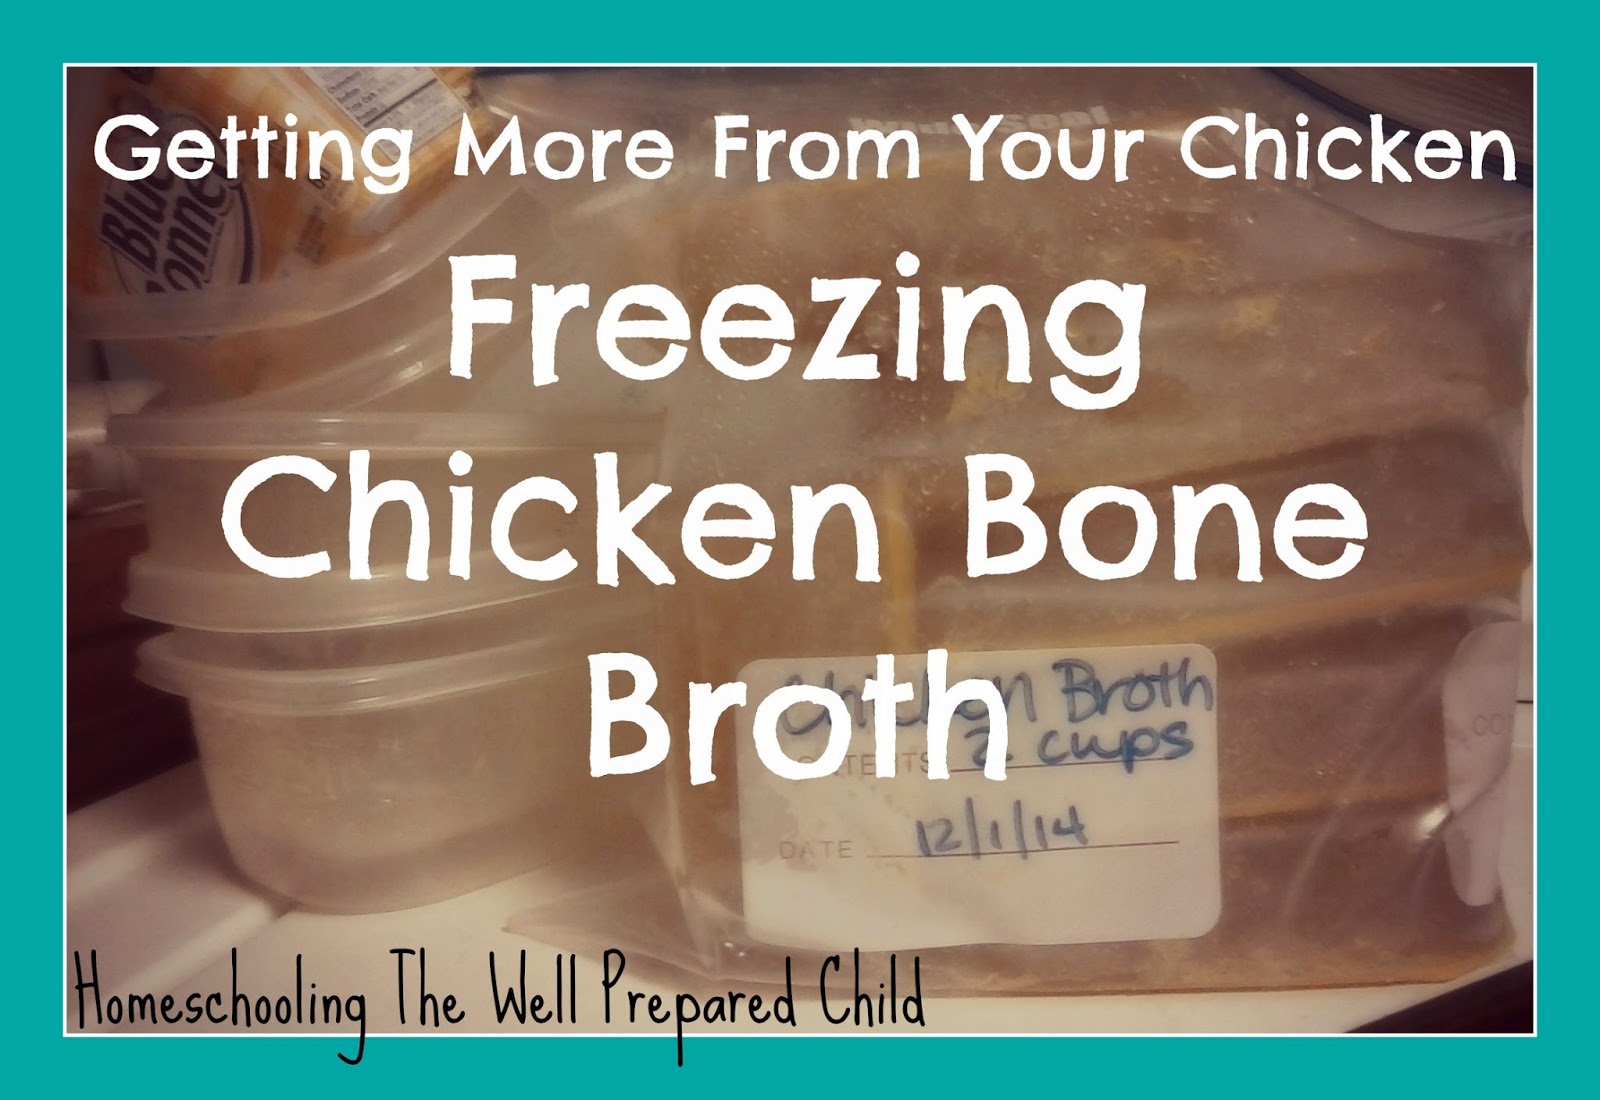 Getting More From Your Chicken: Freezing Chicken Bone Broth